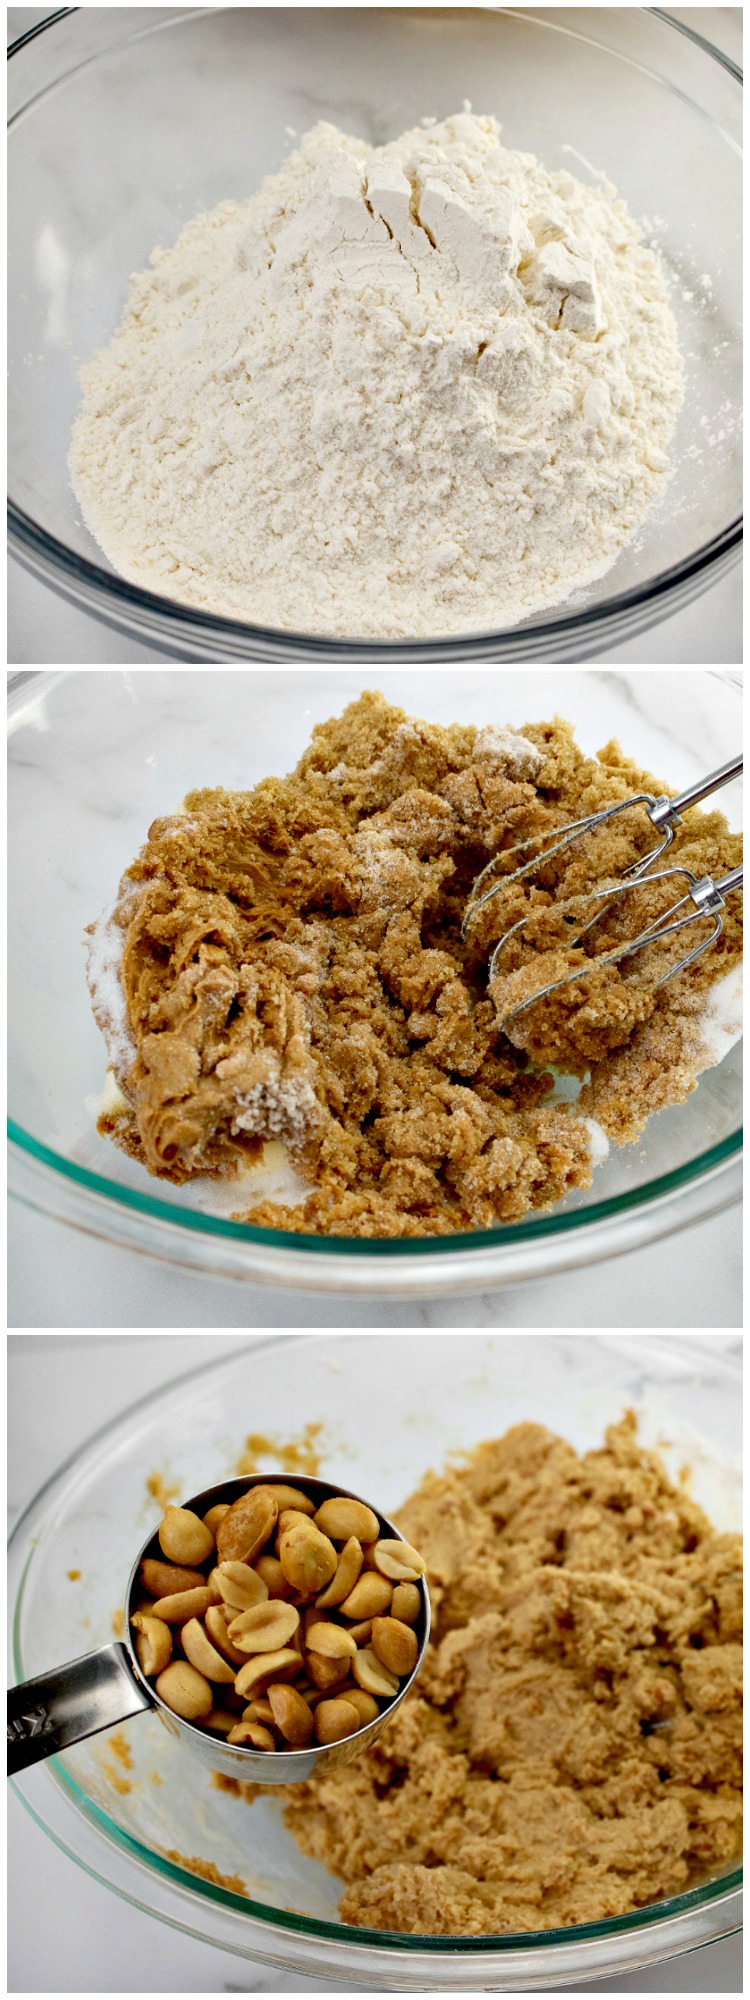 Add dry ingredients to wet ingredients for Chunky Peanut Butter Cookies